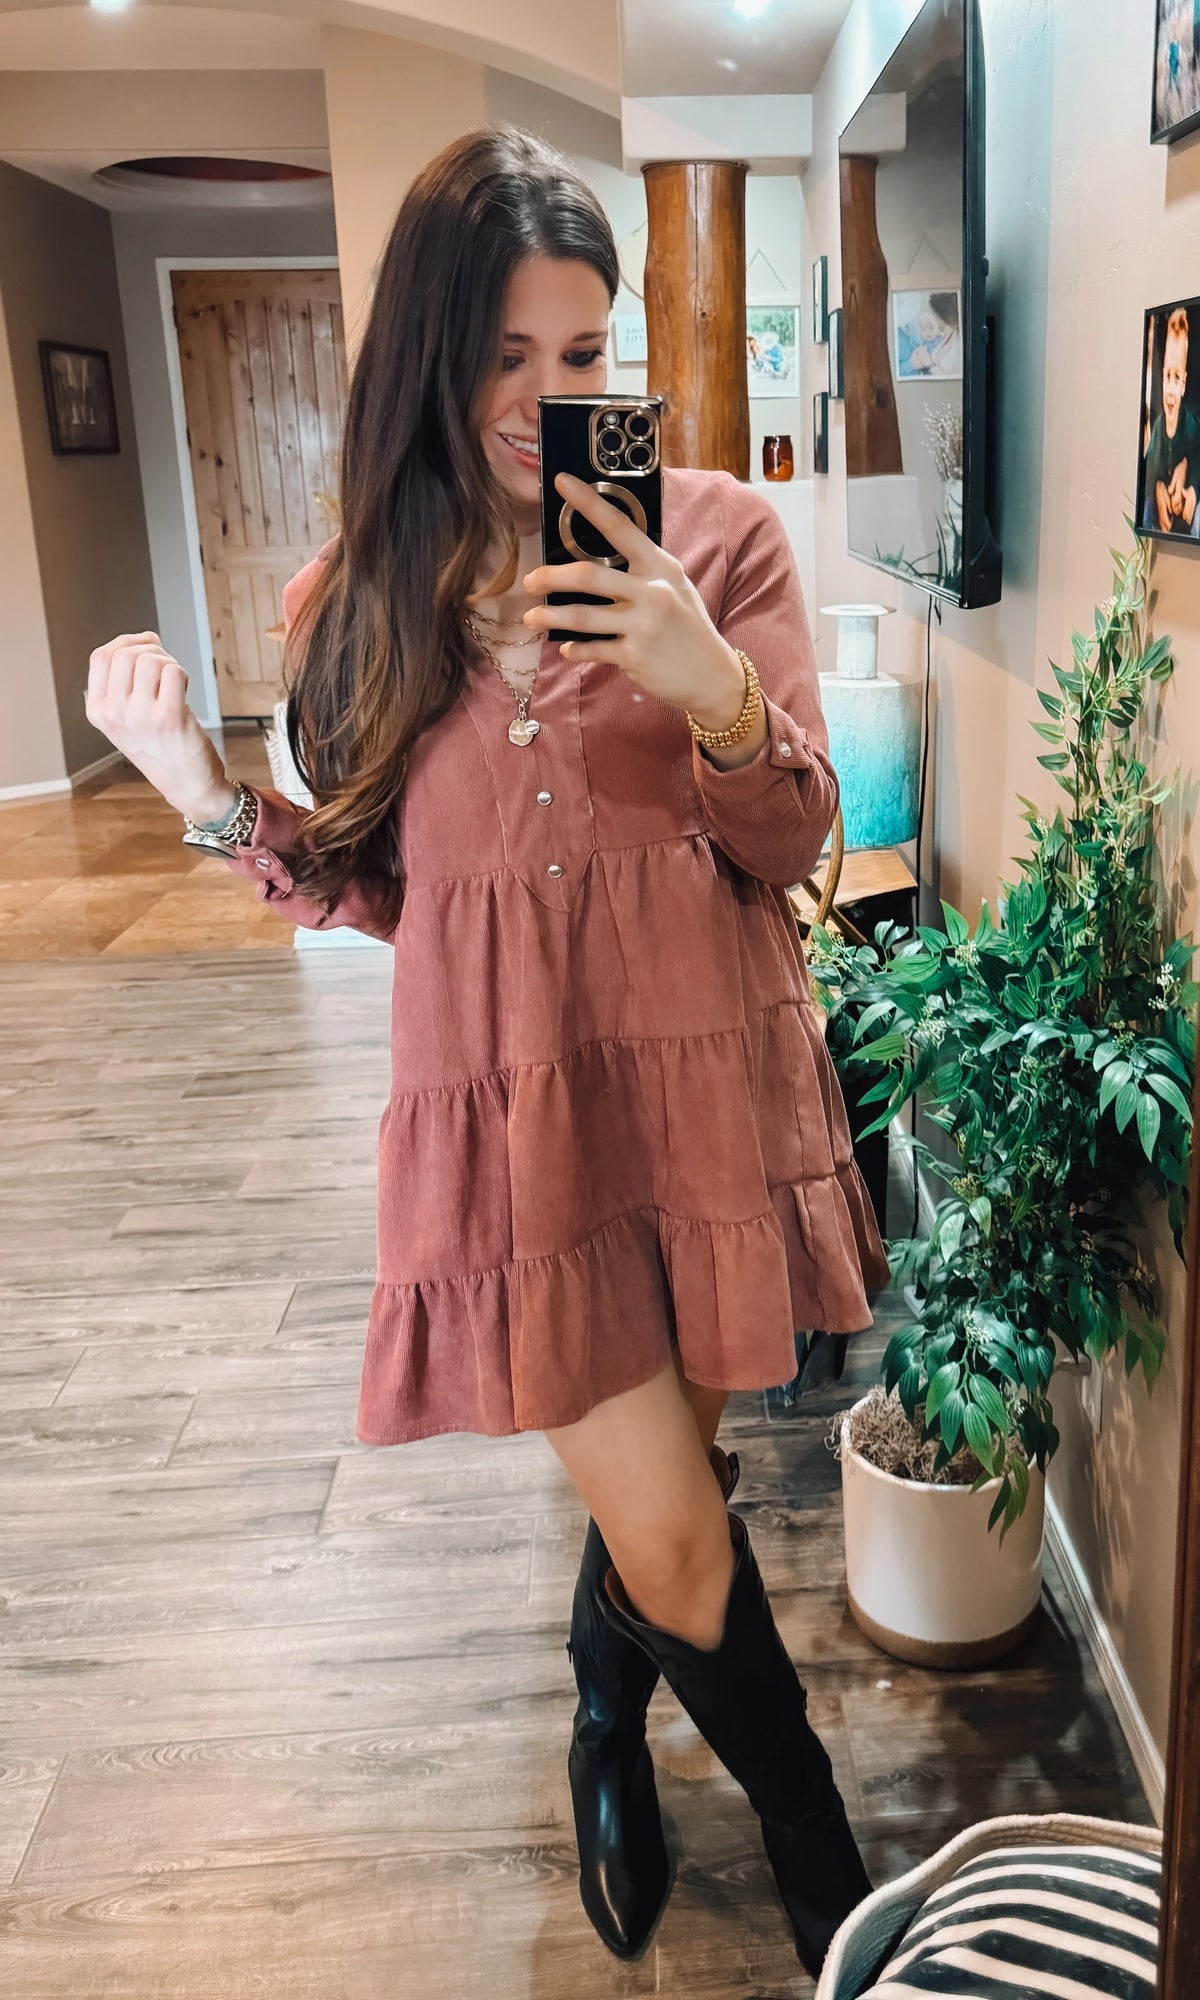 Out West Corduroy Dress